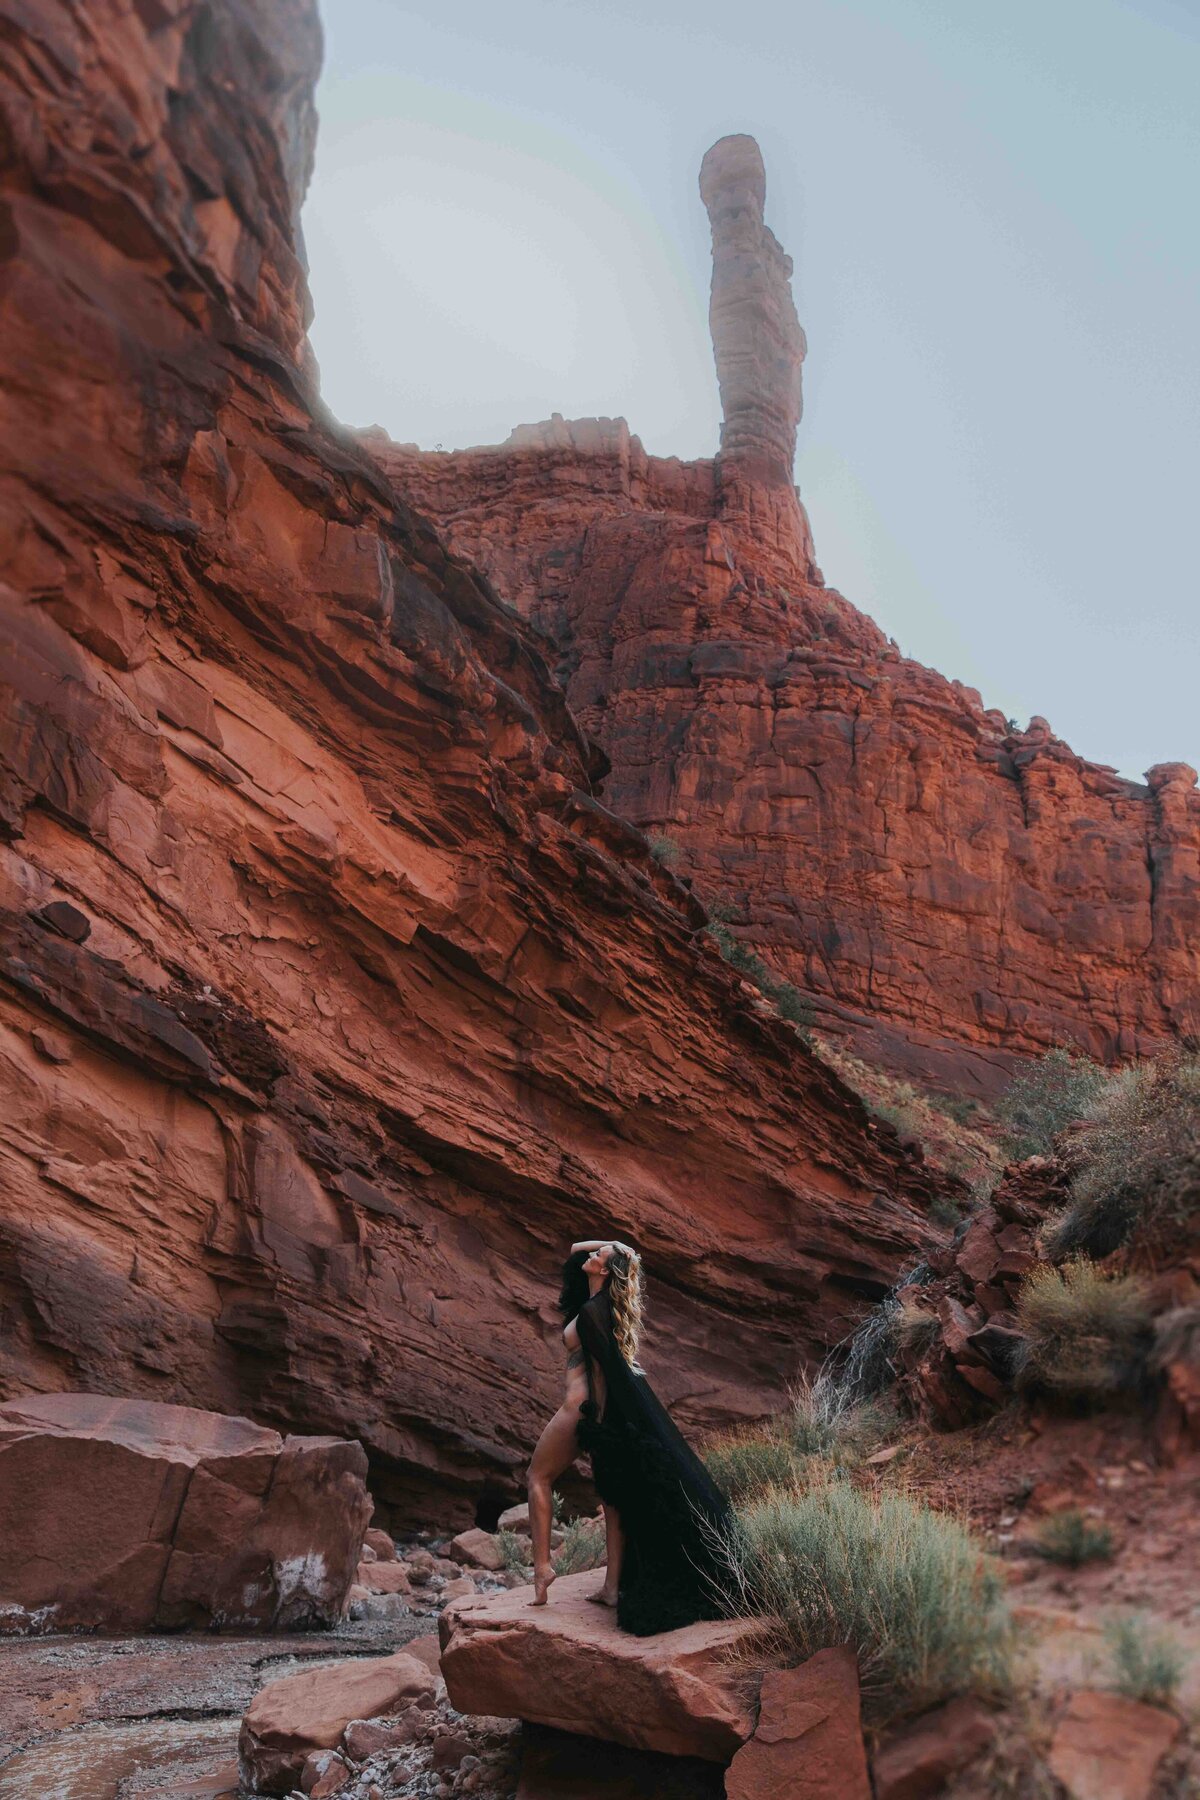 Woman posing in a desert canyon wearing only a robe